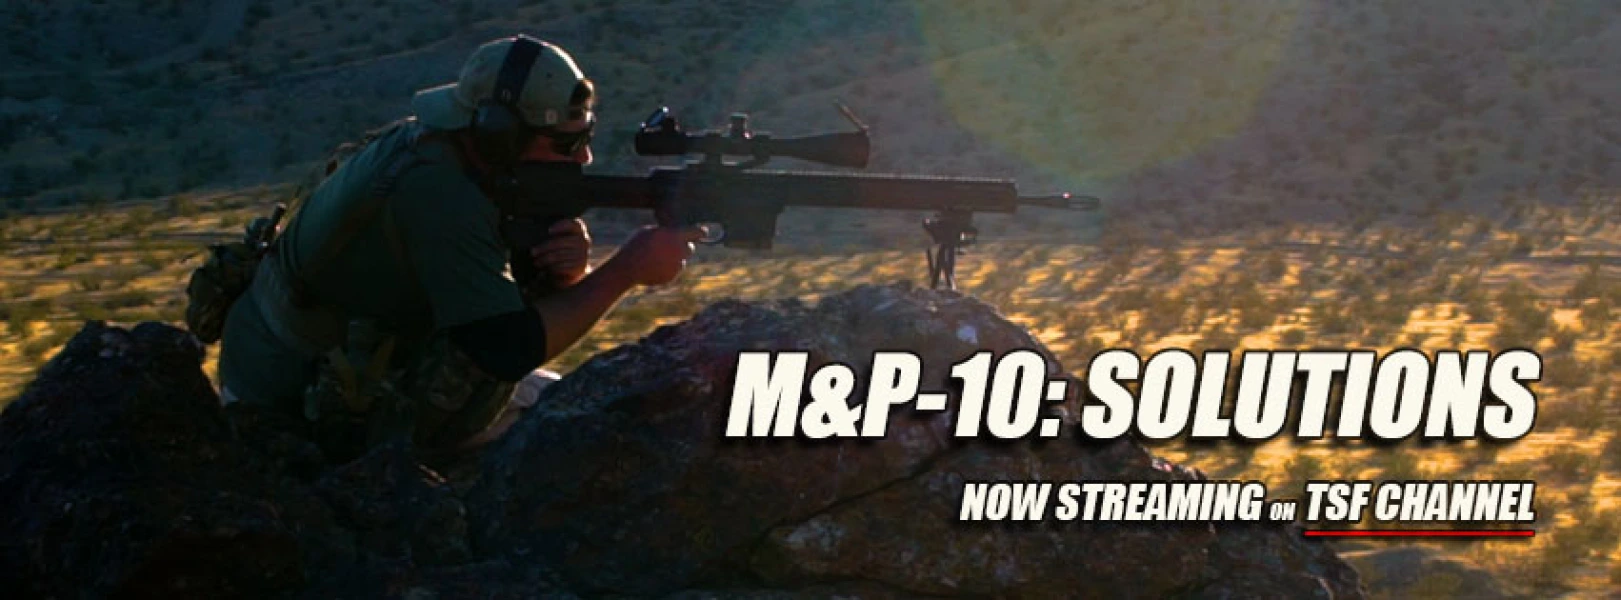 TSF Channel Presents: M&P-10: SOLUTIONS